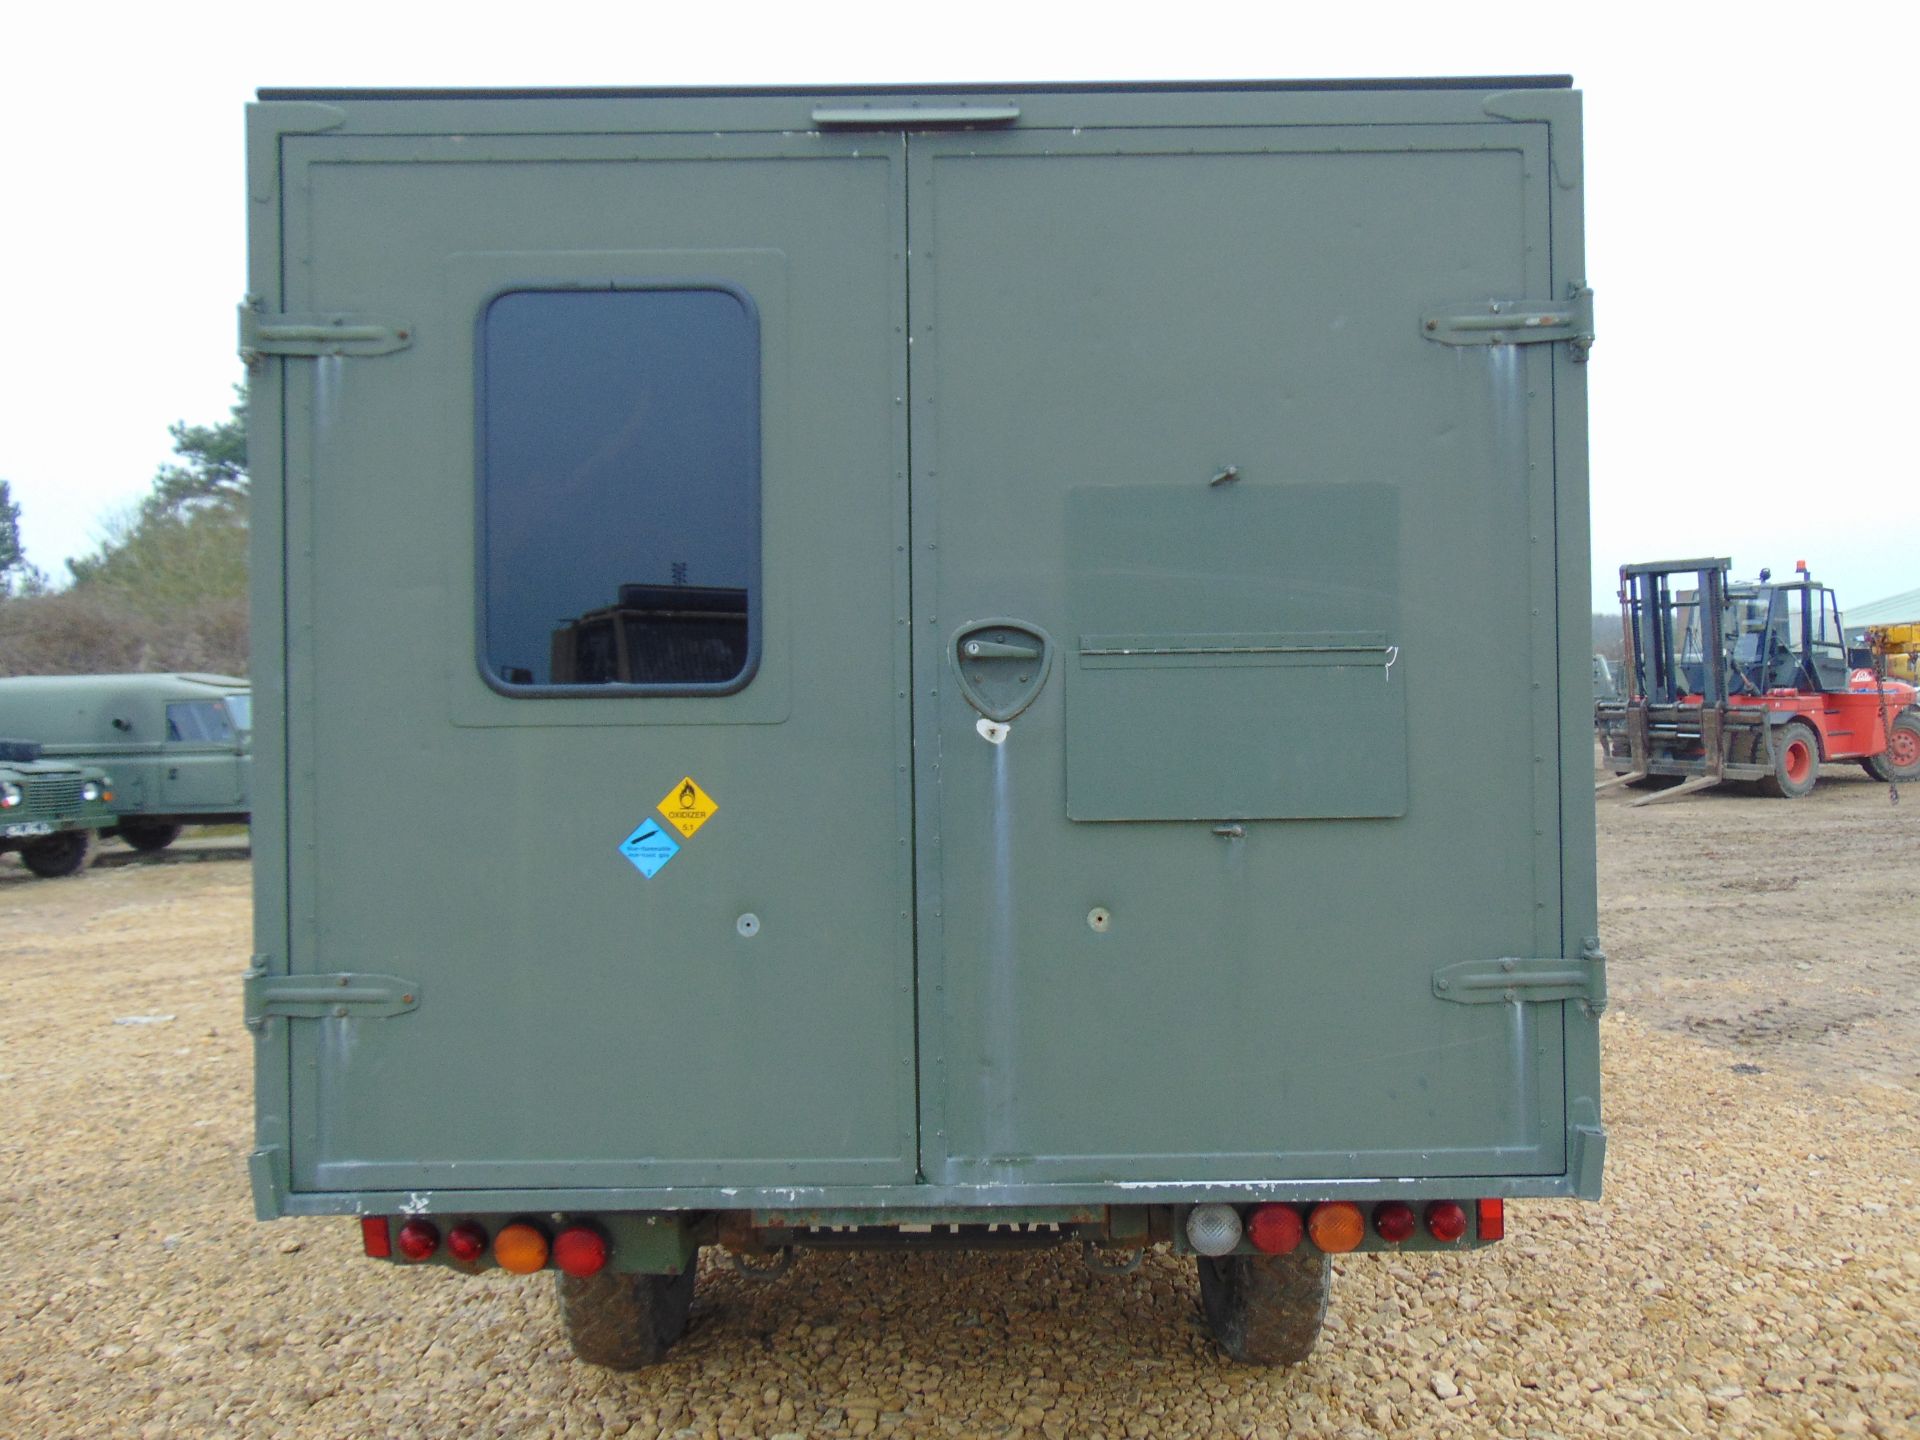 Military Specification Land Rover Wolf 130 ambulance - Image 7 of 19